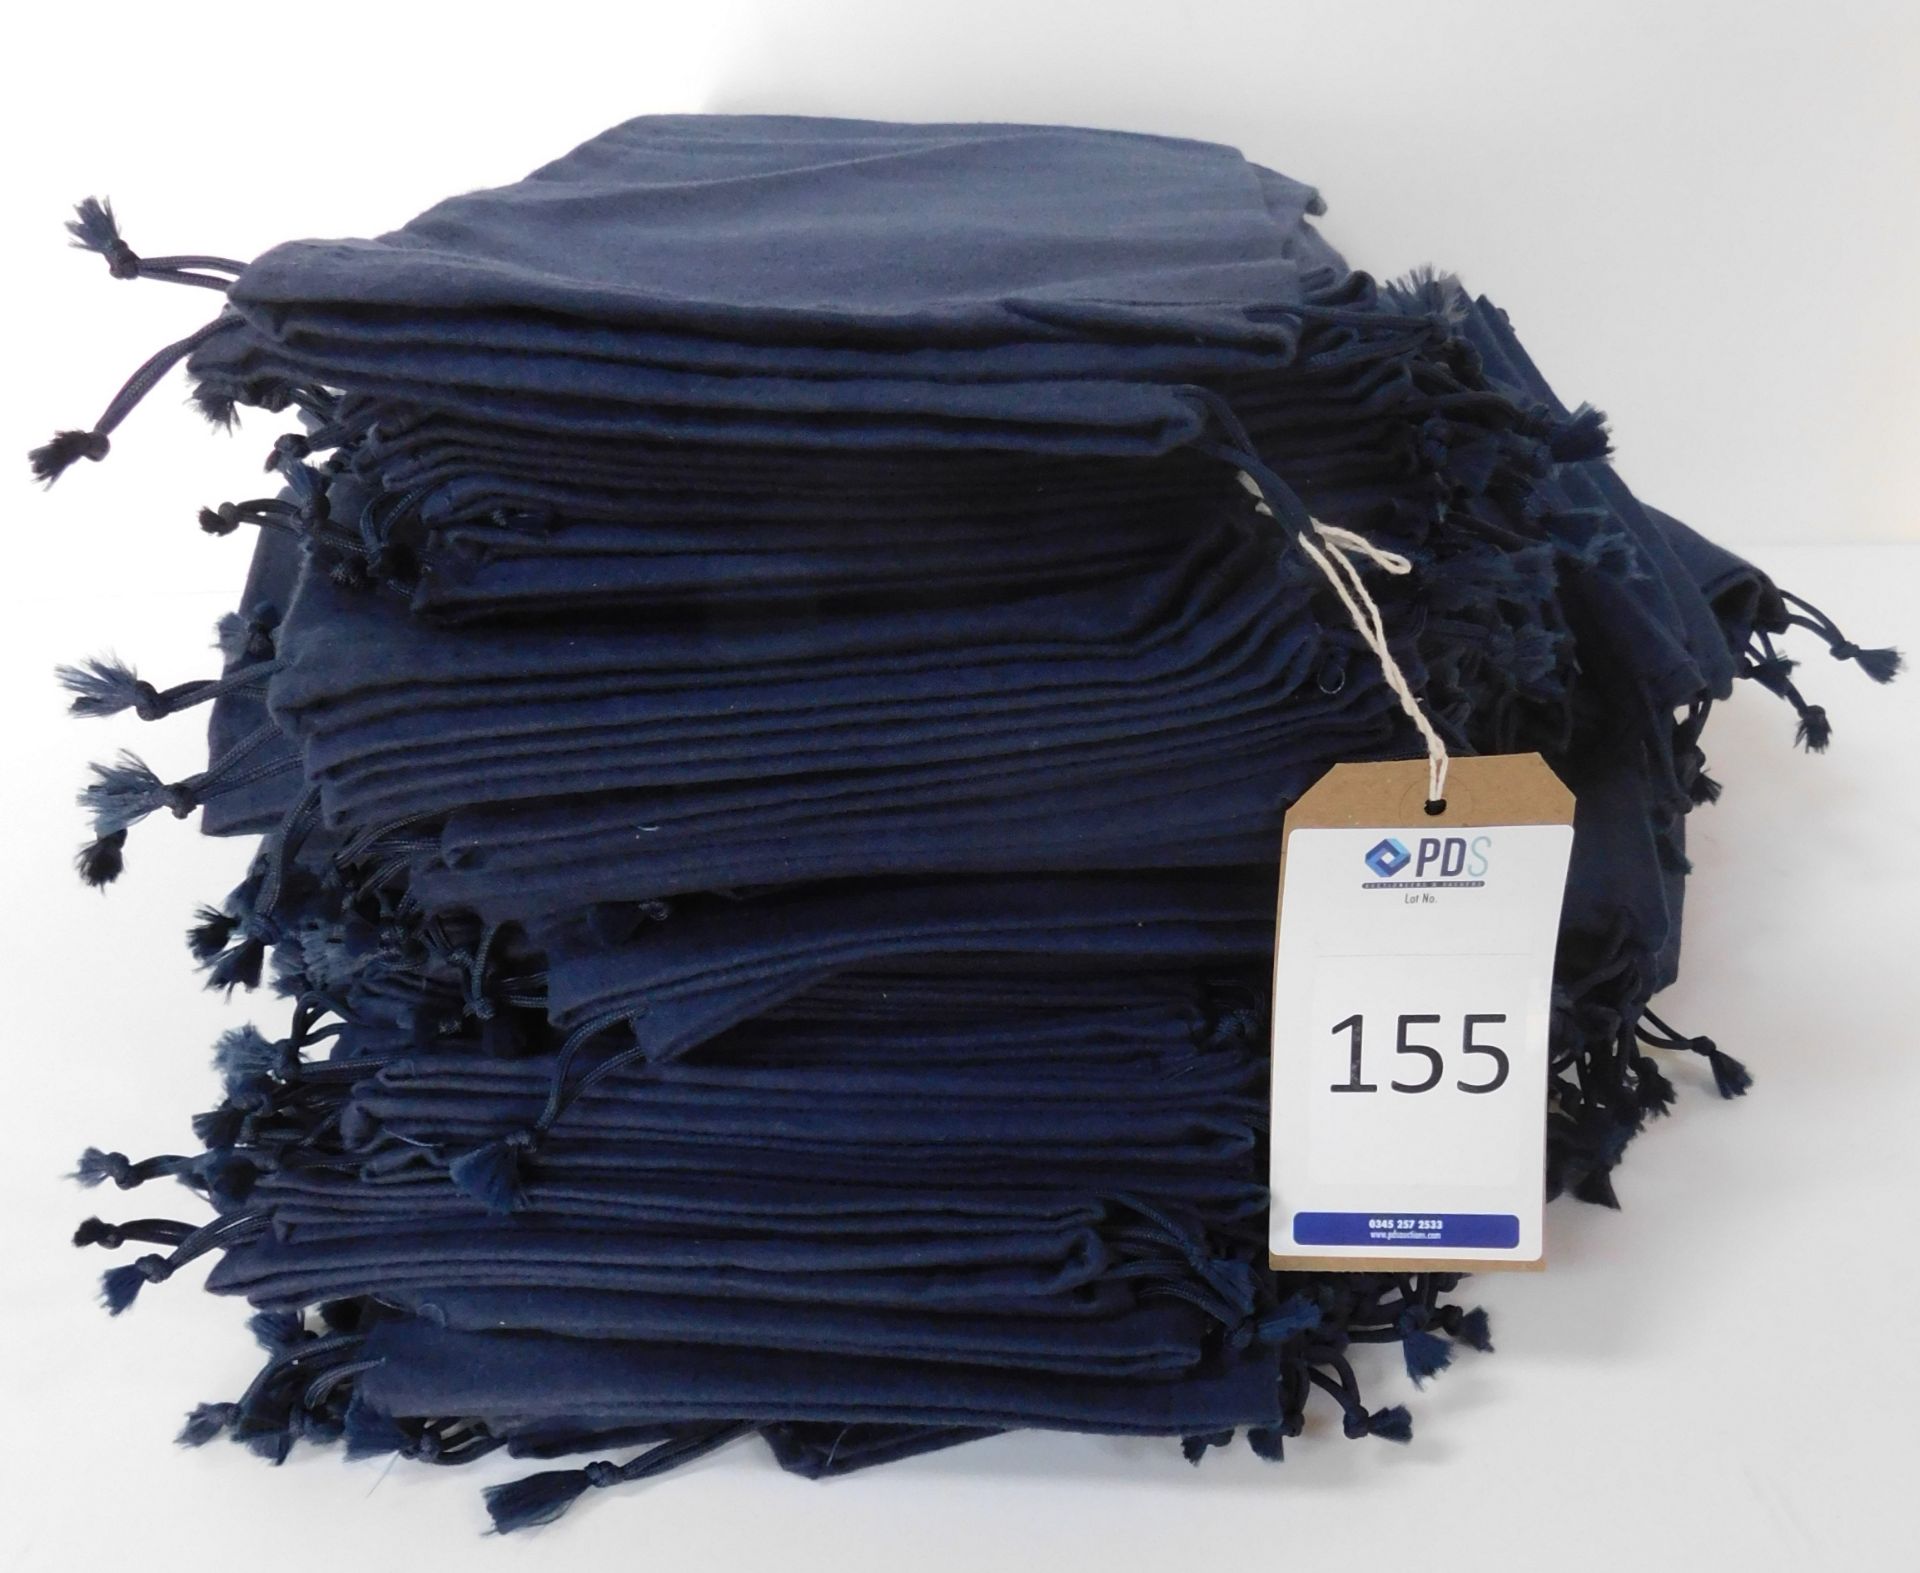 150 Unbranded Navy Boot Bags (Location: Brentwood - See General Notes for Details)